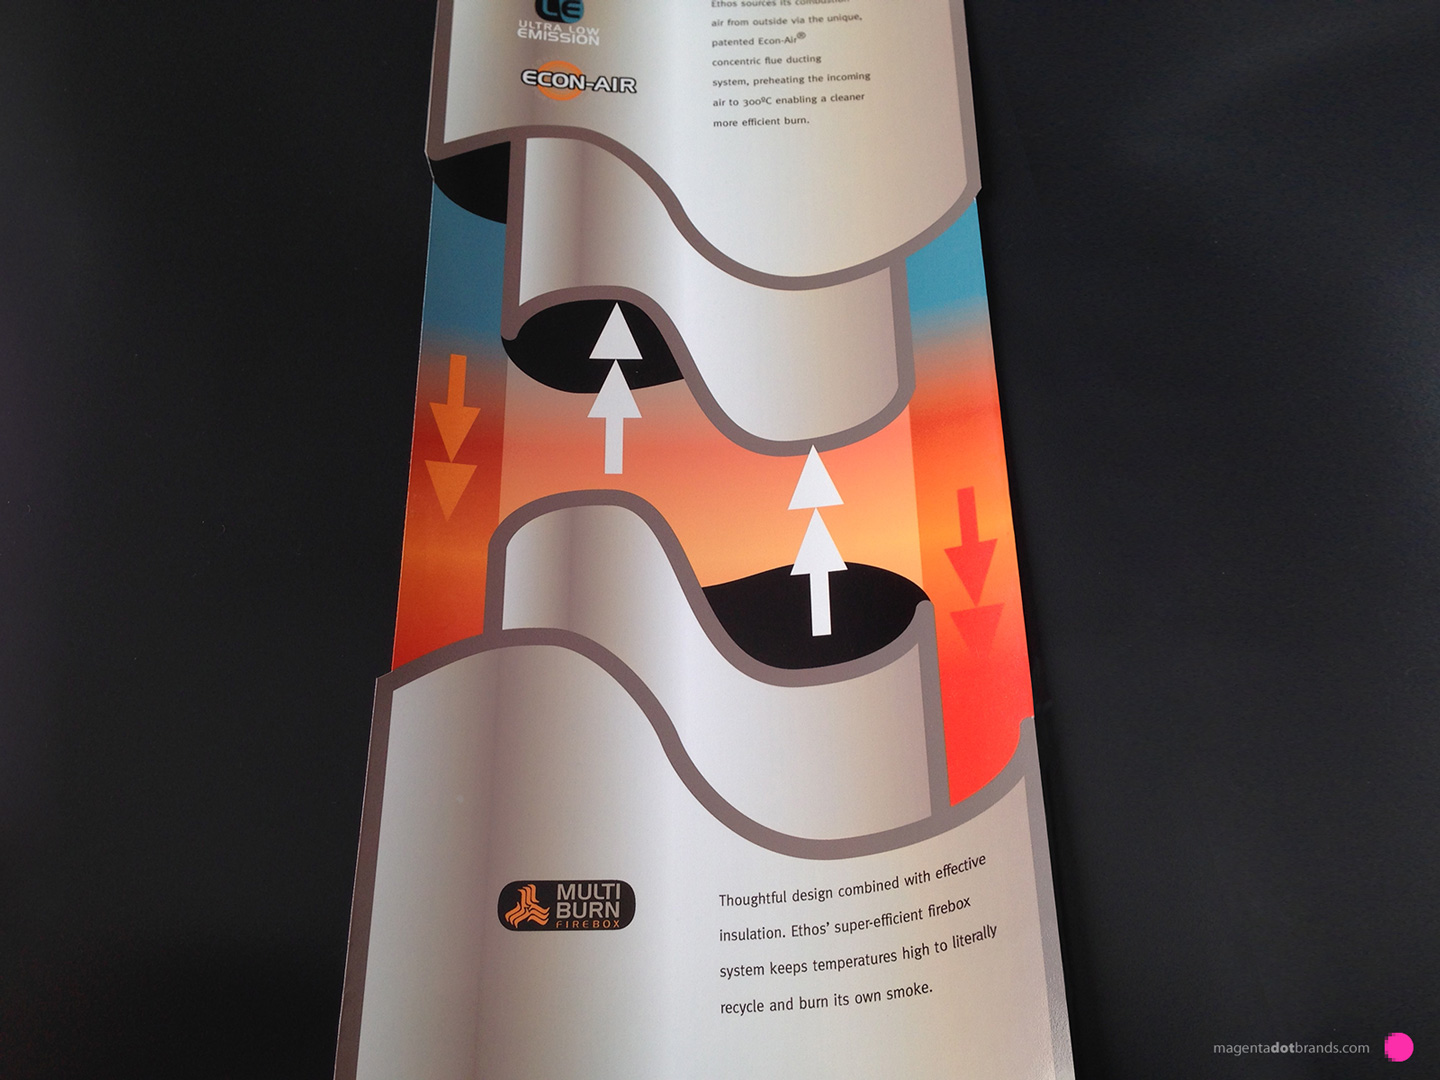 Ethos Woodfires ‘warm your world’ point of sale retail display collateral. A custom cut log laser etched with the Ethos brand acts as a display rack for the Ethos ‘best’ product catalogues on the shop floor.